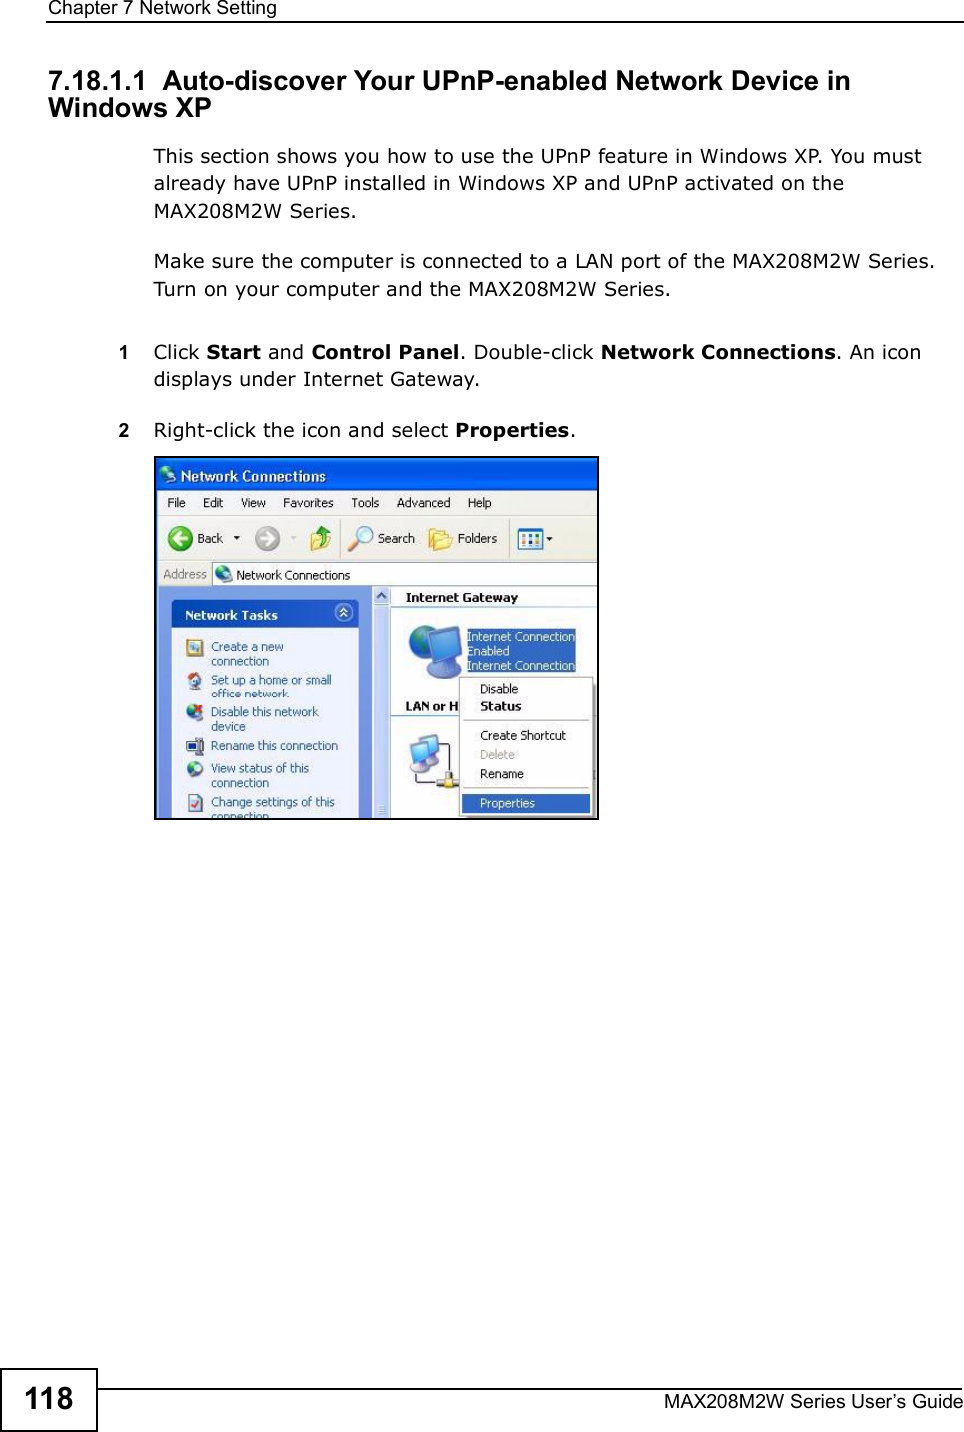 Chapter 7Network SettingMAX208M2W Series User s Guide1187.18.1.1  Auto-discover Your UPnP-enabled Network Device in Windows XPThis section shows you how to use the UPnP feature in Windows XP. You must already have UPnP installed in Windows XP and UPnP activated on the MAX208M2W Series.Make sure the computer is connected to a LAN port of the MAX208M2W Series. Turn on your computer and the MAX208M2W Series. 1Click Start and Control Panel. Double-click Network Connections. An icon displays under Internet Gateway.2Right-click the icon and select Properties. 